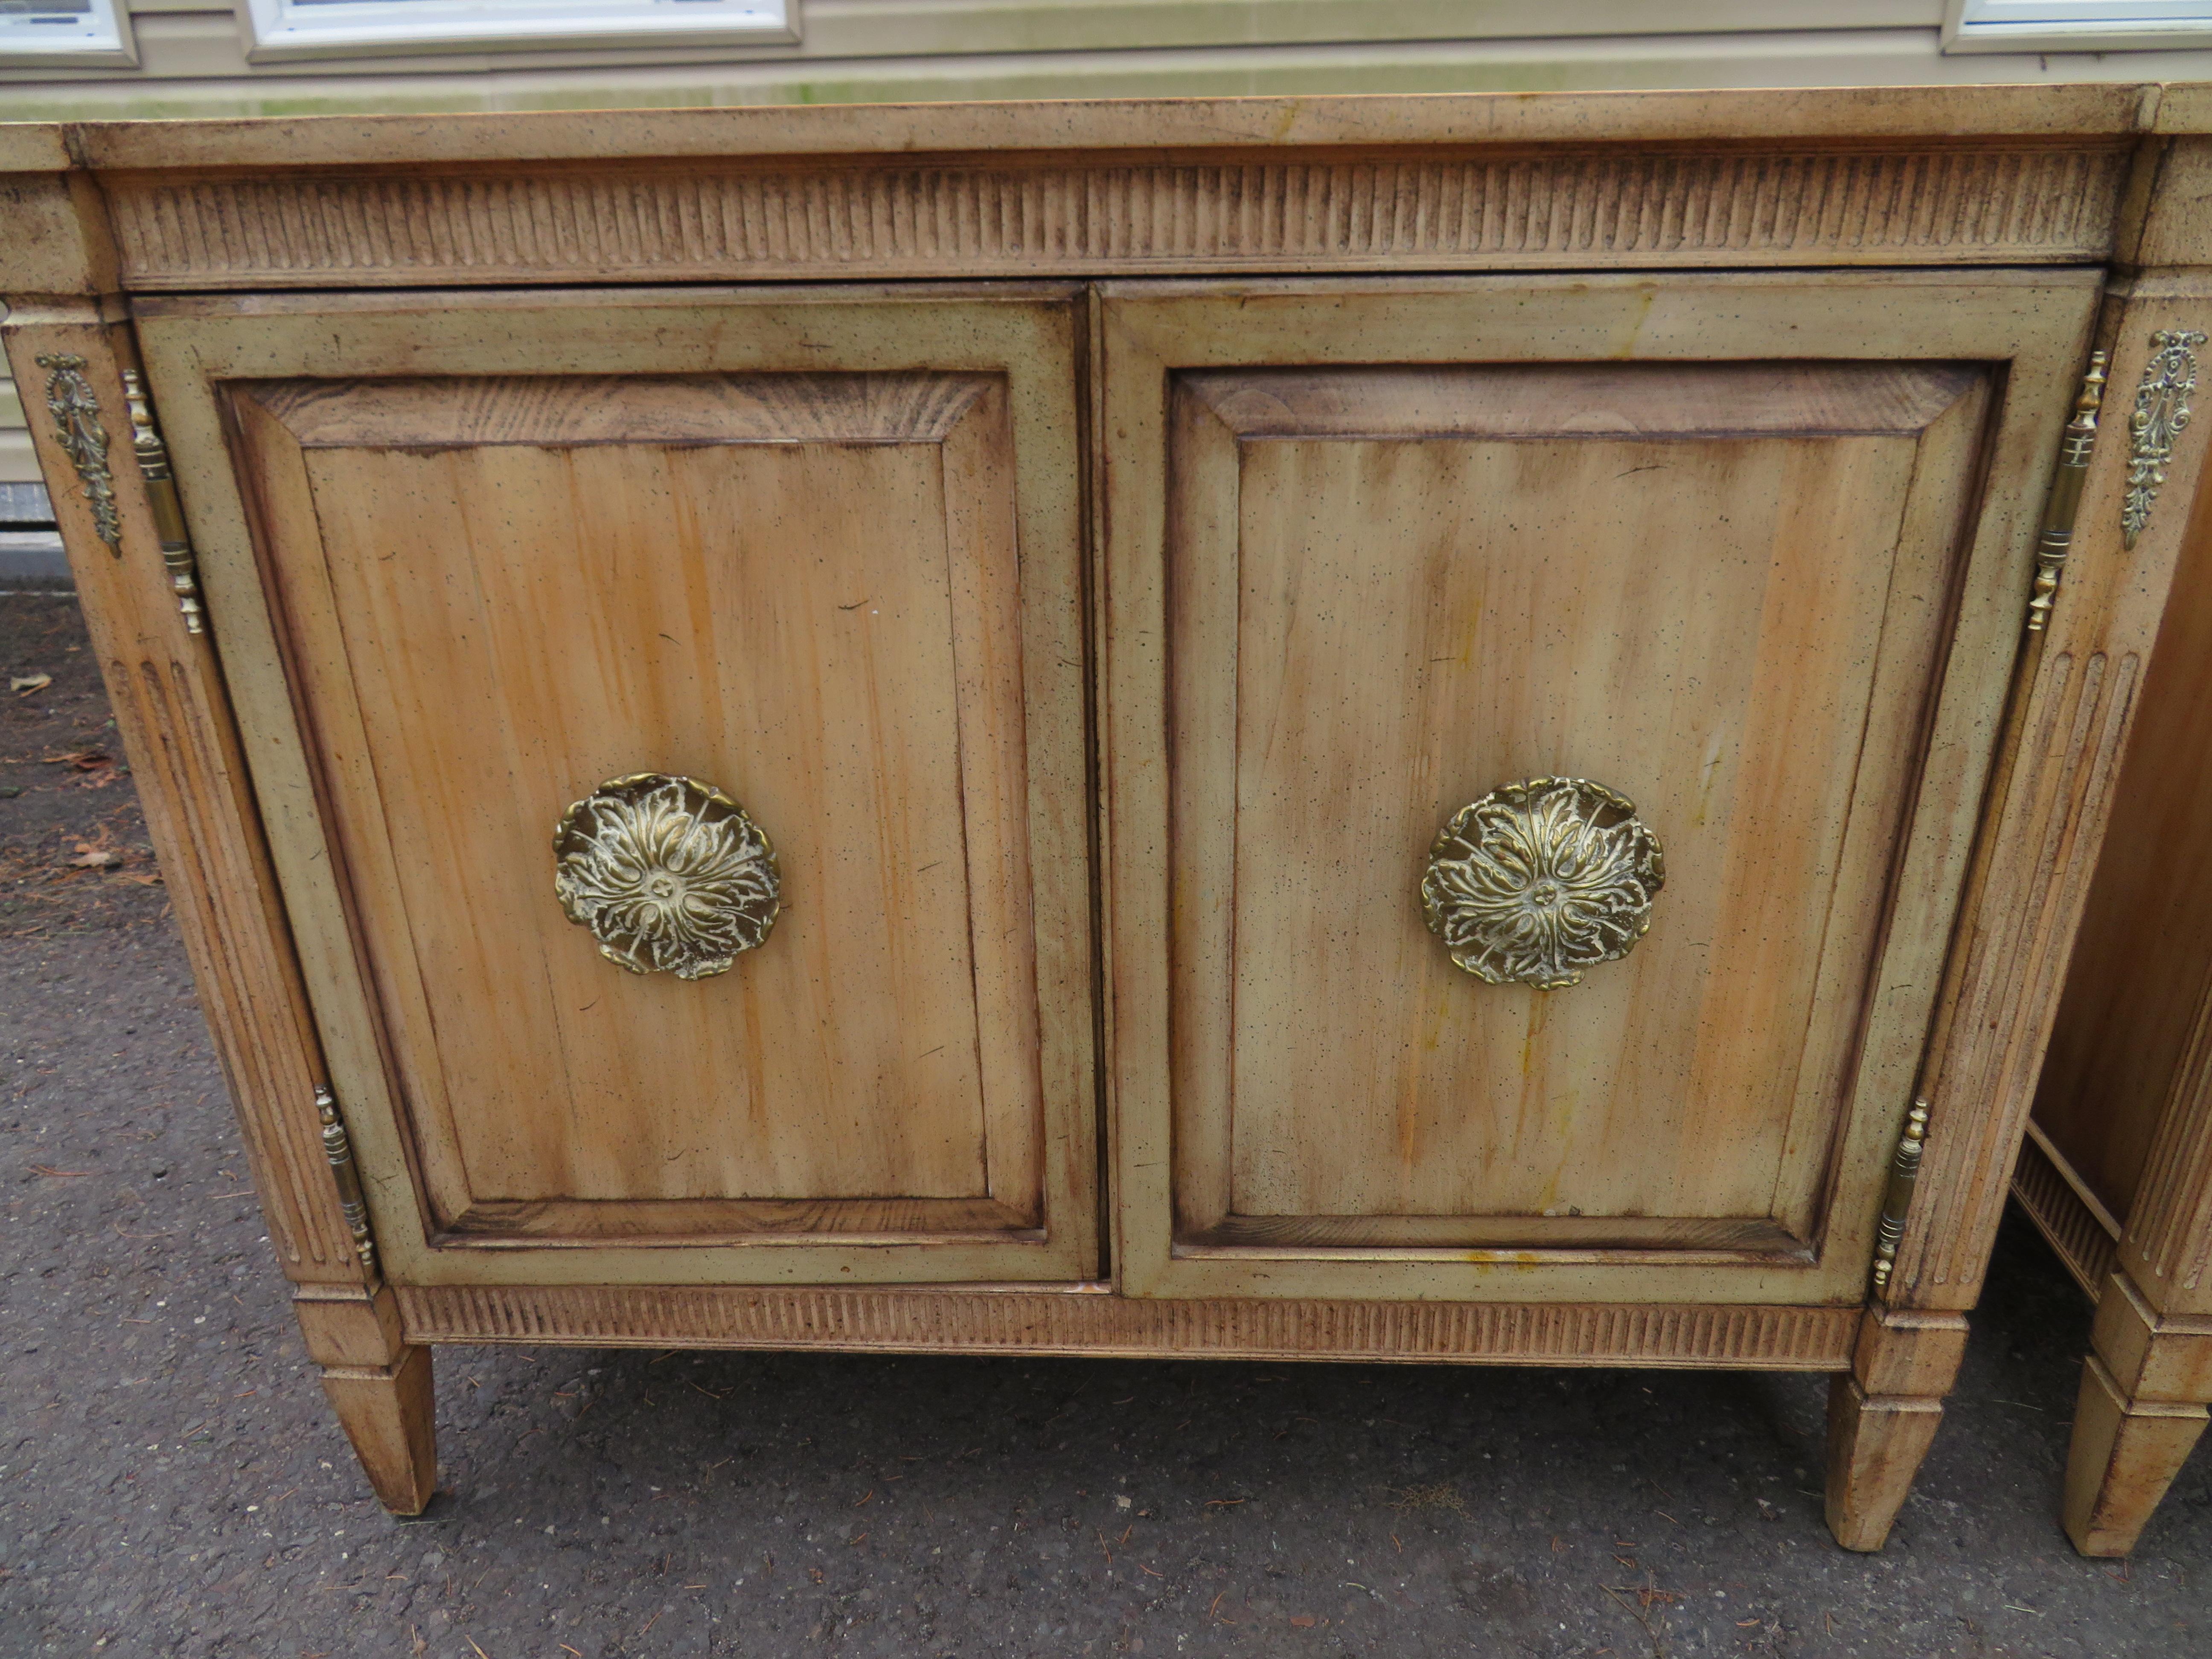 Stunning pair of distressed finish neoclassical bachelors chests. We love the intentionally distressed finish on these against the classical styling of these fine chests. Use as oversized nightstands or anywhere you need matching chests to add